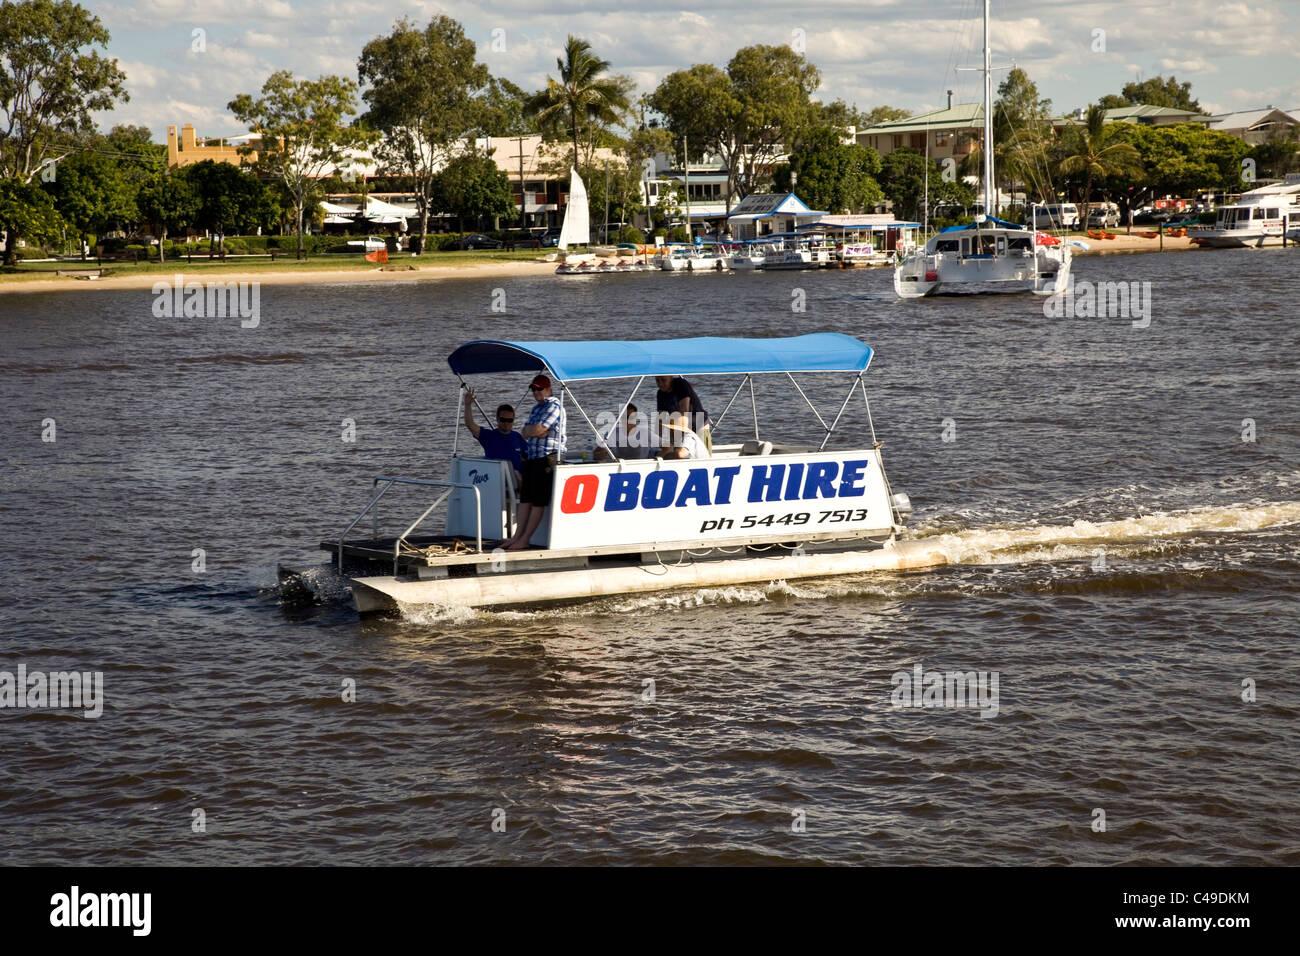 Hire boat at Noosa, Queensland Stock Photo